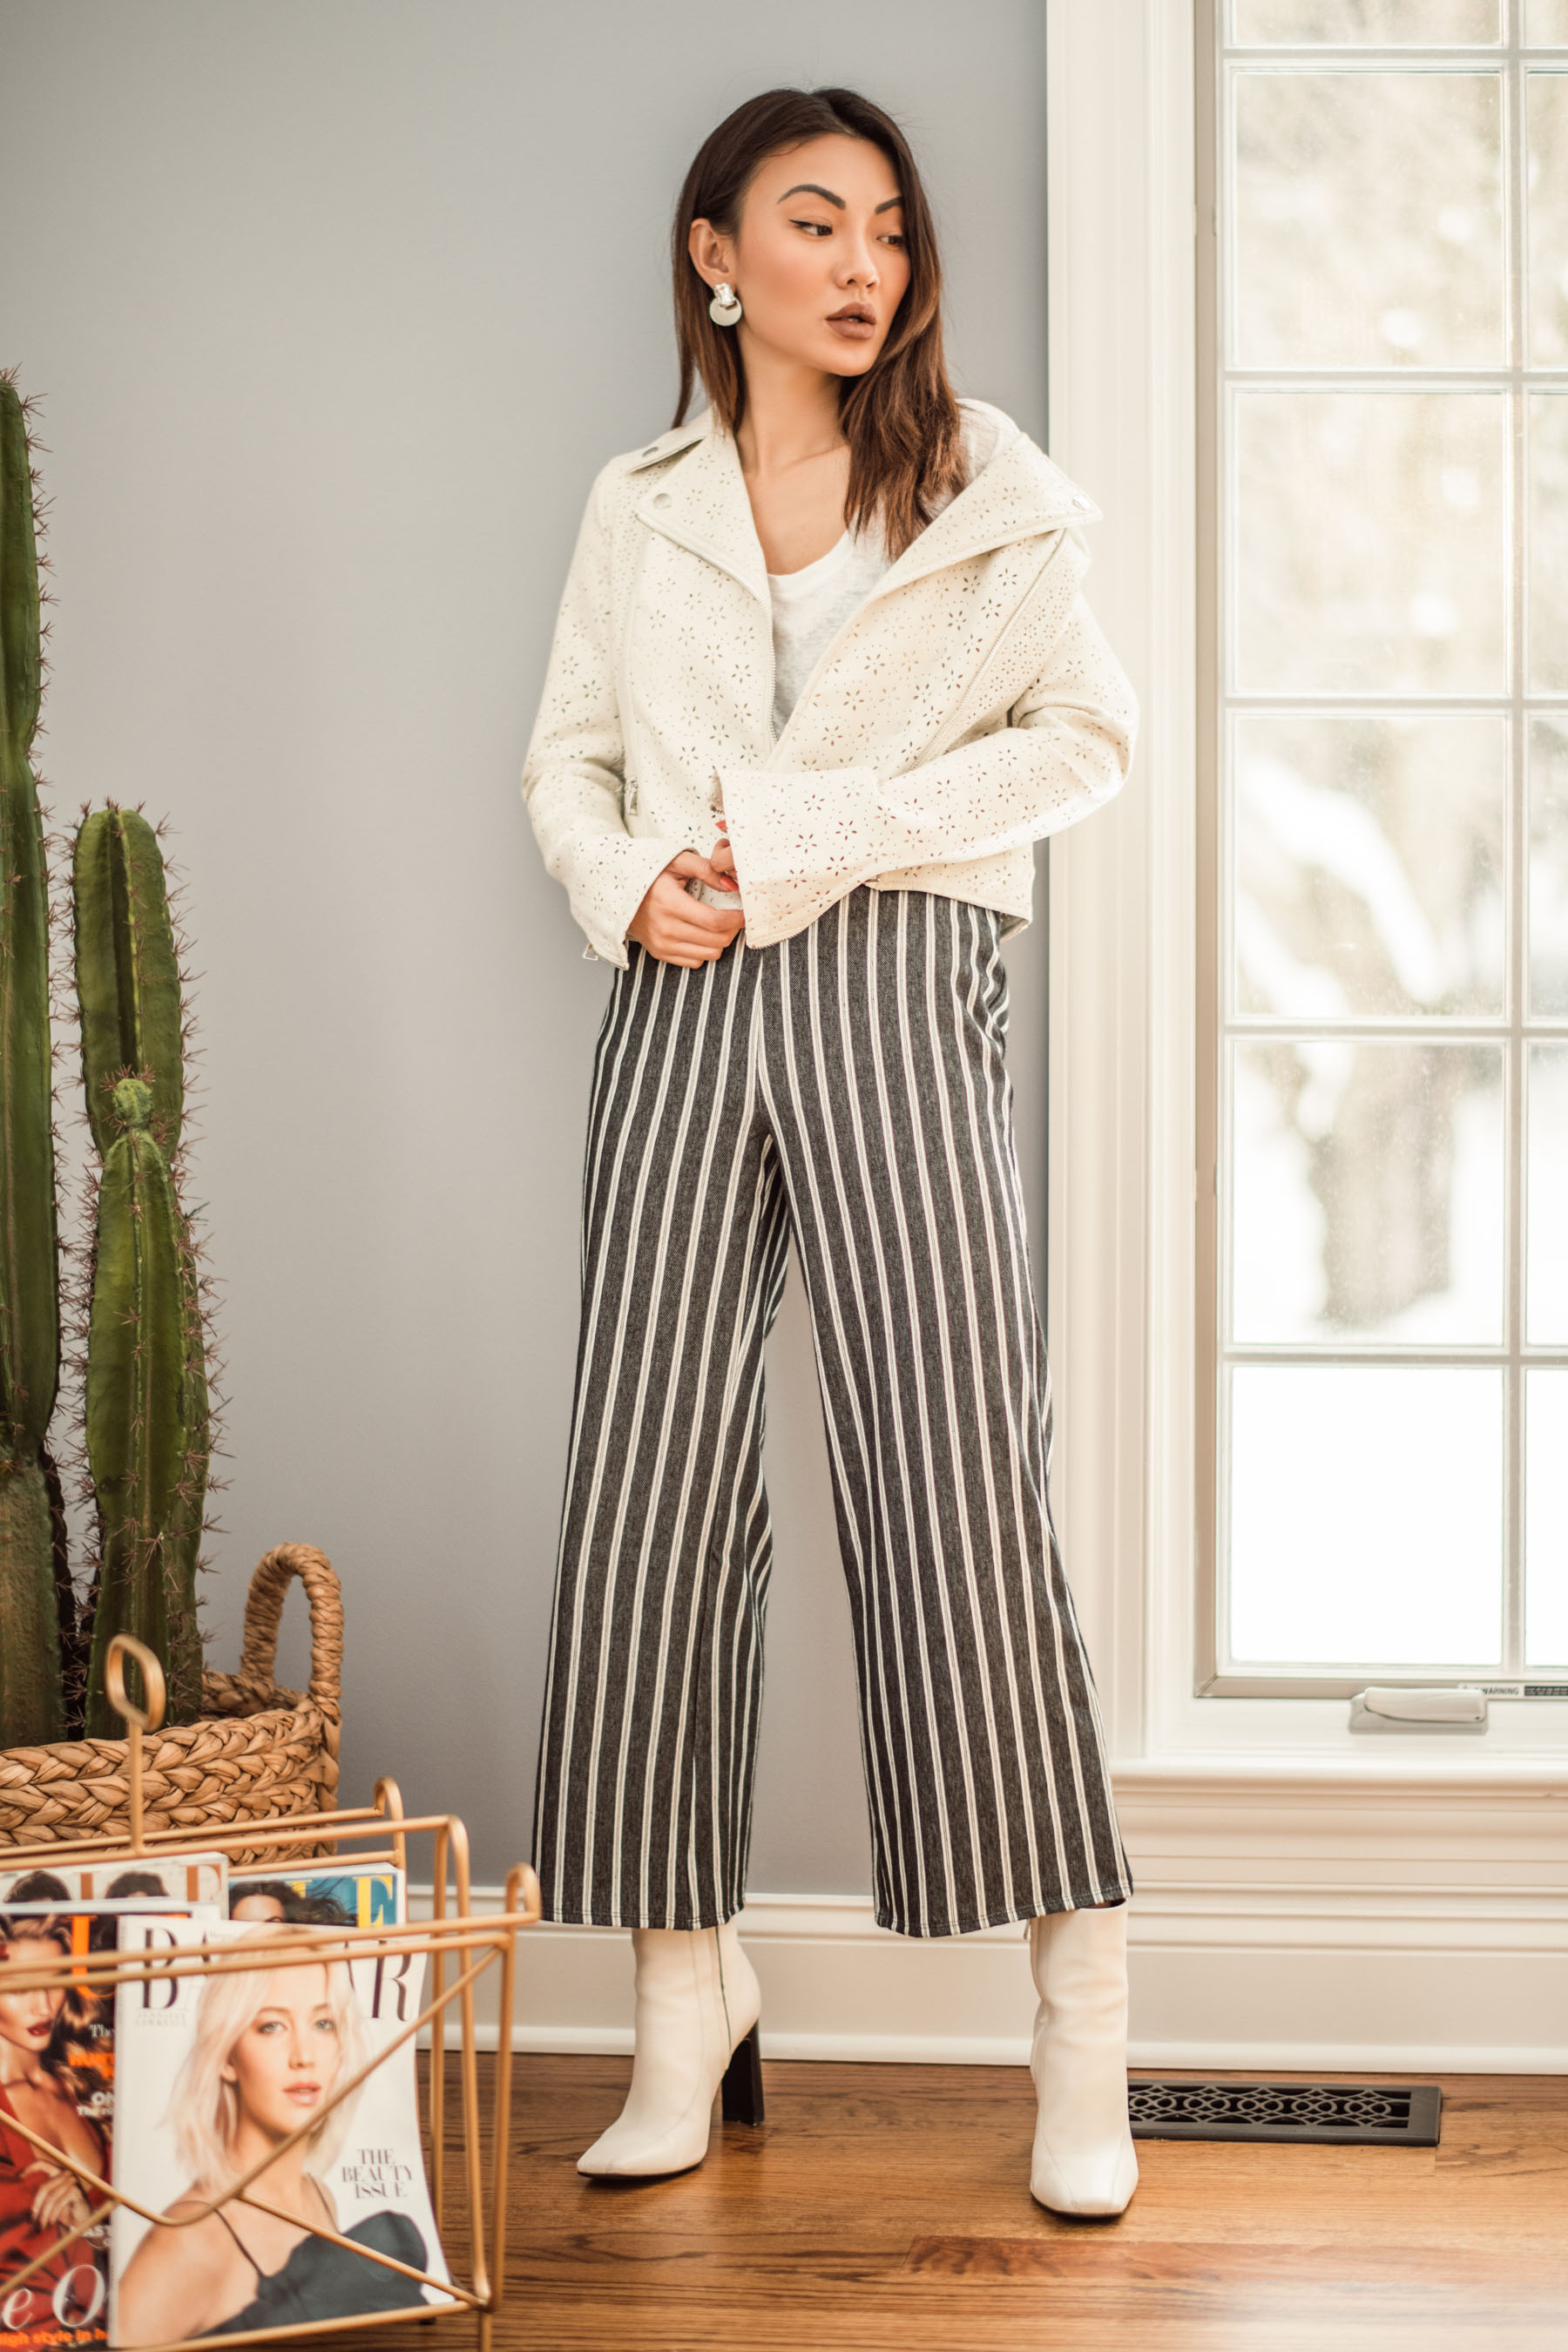 Work Wear Trends for an Ultra Chic Look - Express leather jacket, Express striped trousers, white ankle boots, professional spring outfit, professional office look // Notjessfashion.com